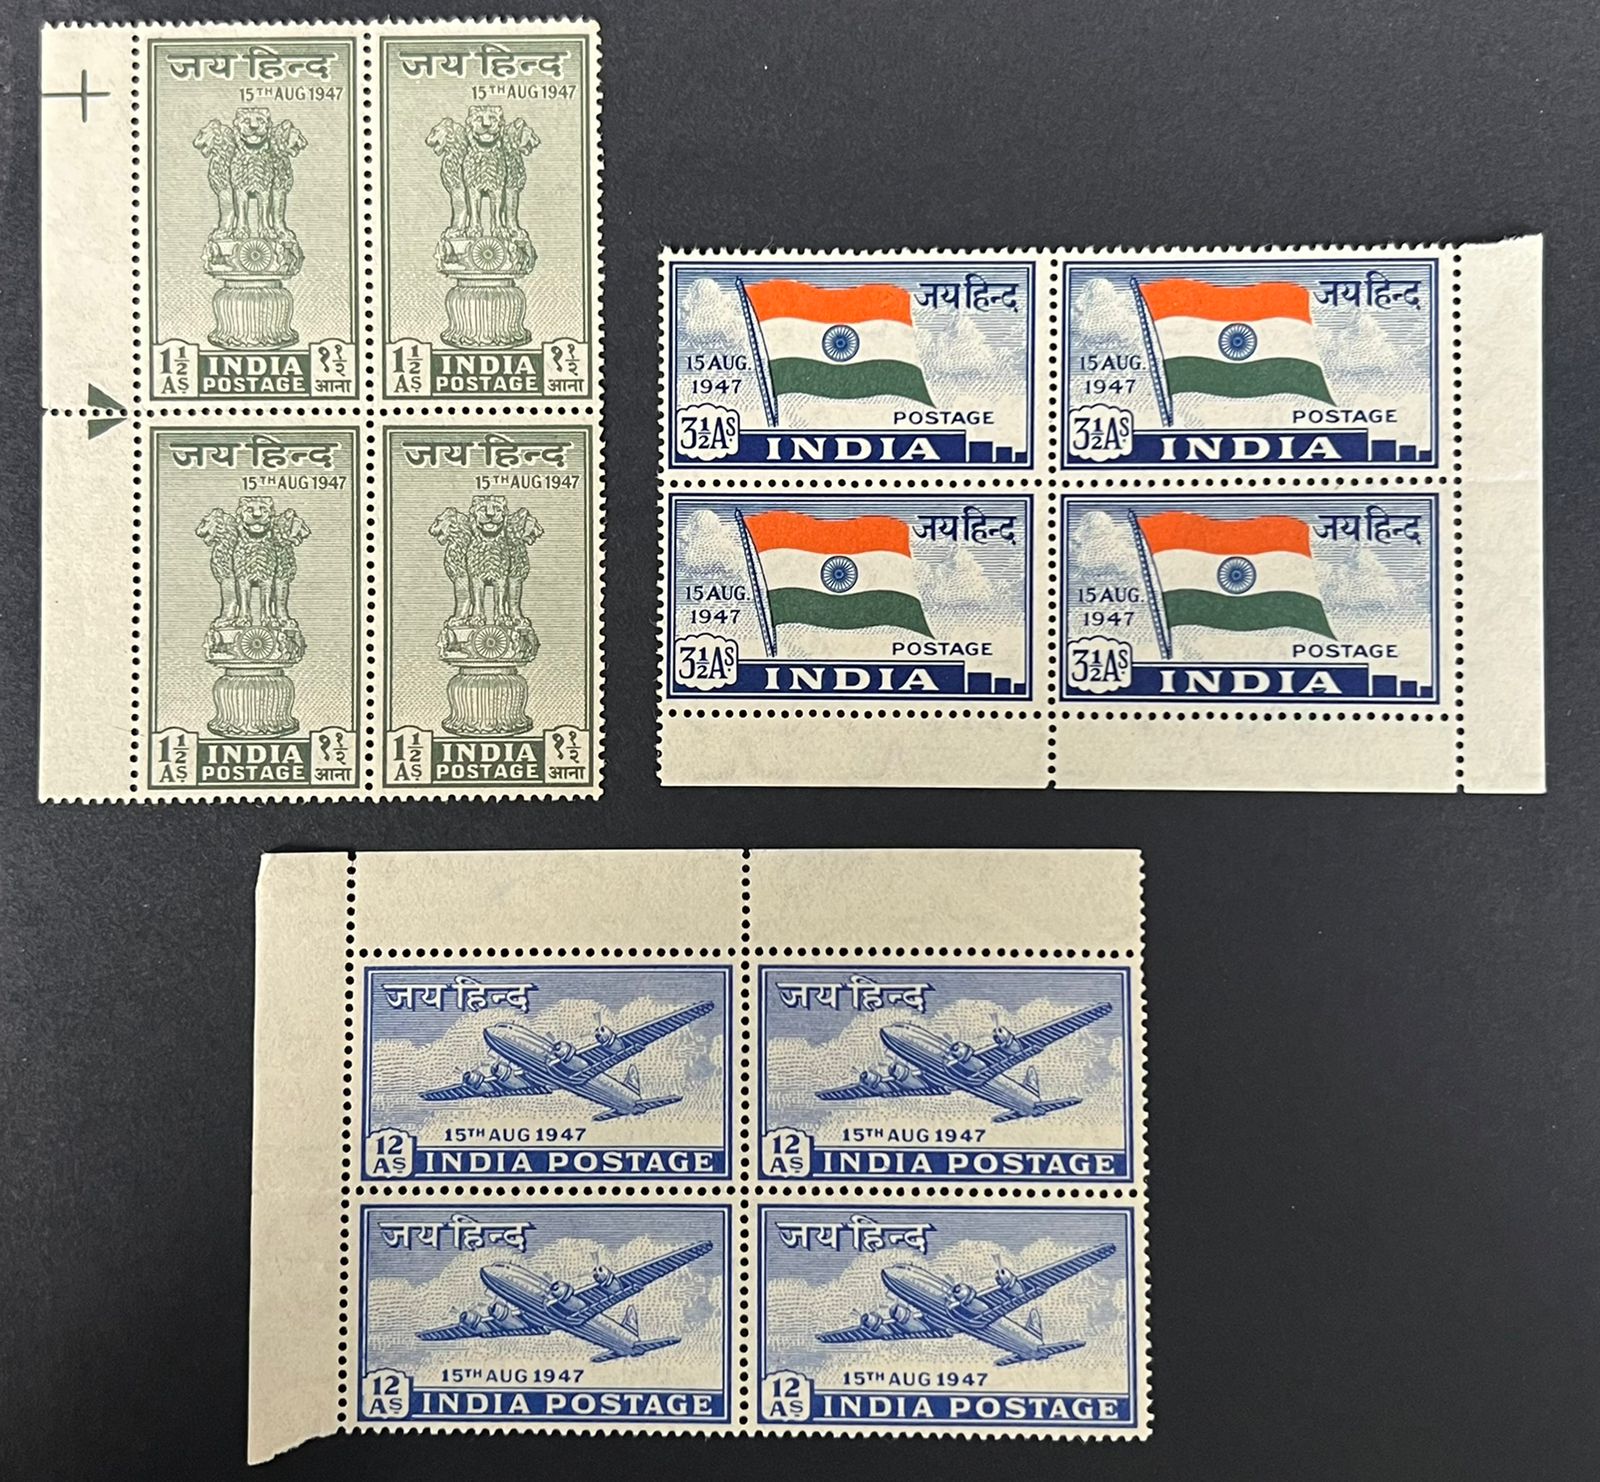 India 1947 First Stamps of Post Independence Jai Hind Set of 3 in Blocks of 4 MNH White Gum